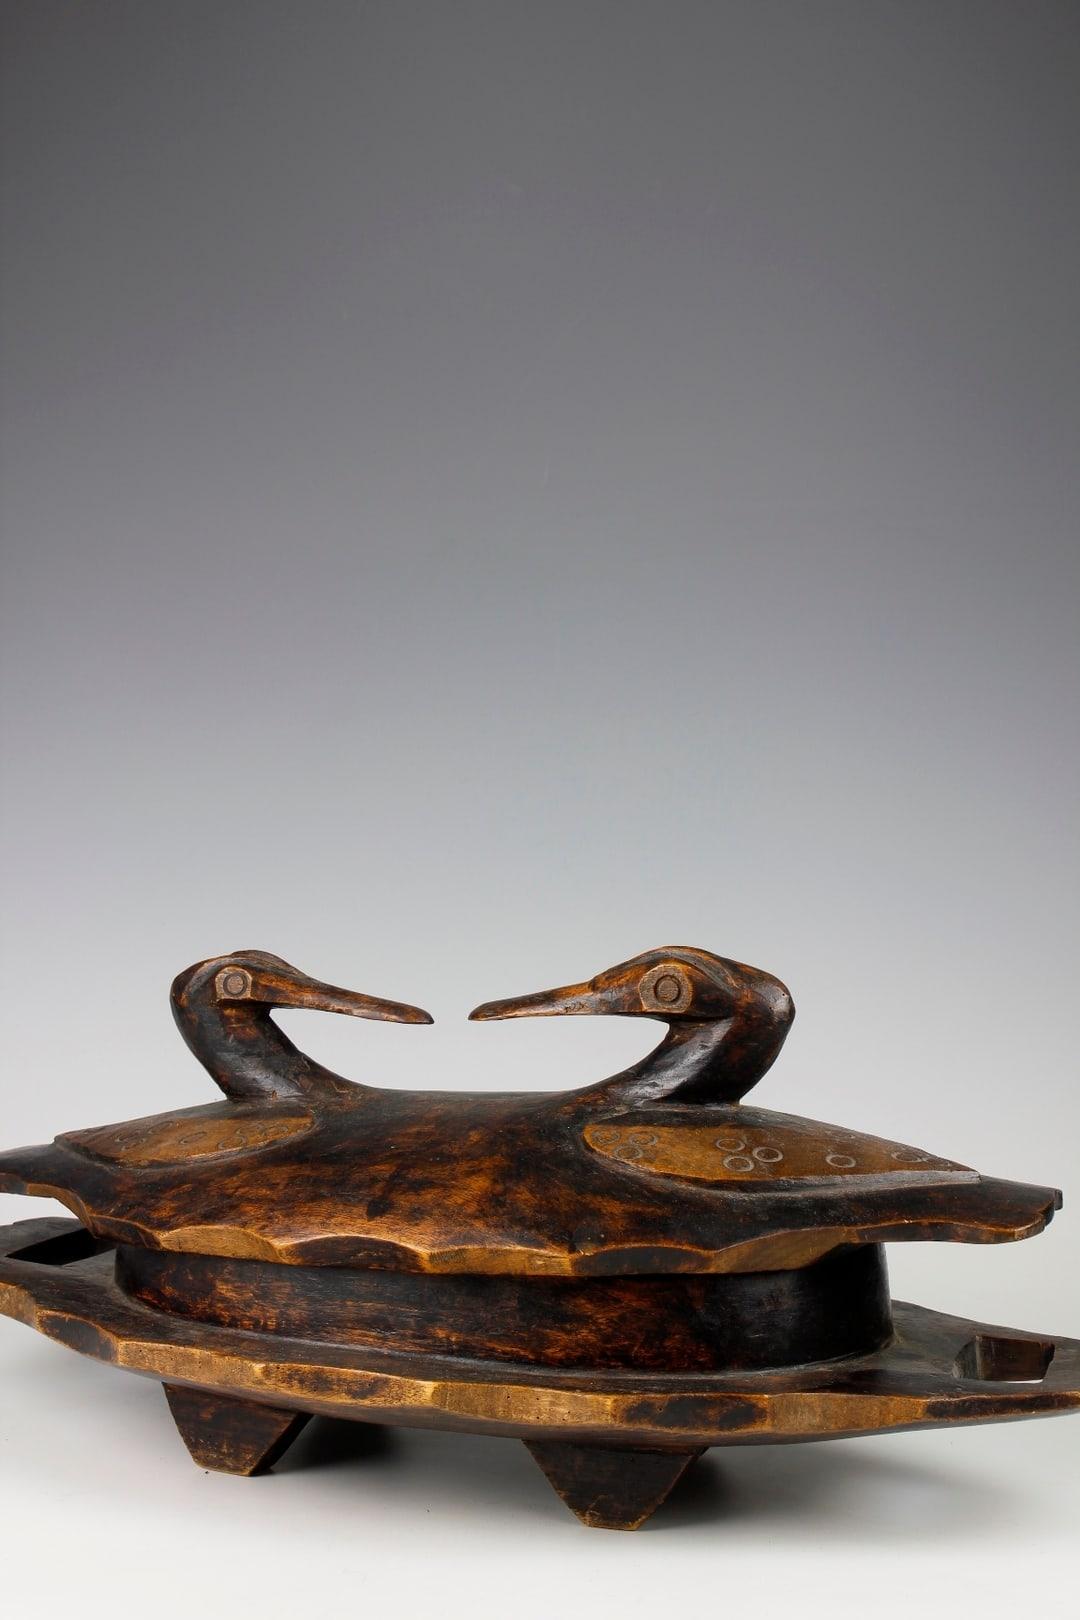 This fine mid-twentieth-century bowl, from the Lozi culture in Zambia, would have been traditionally used to serve and store food. The bowl's base has been made from a single piece of wood, and two beautifully carved ducks decorate the lid.